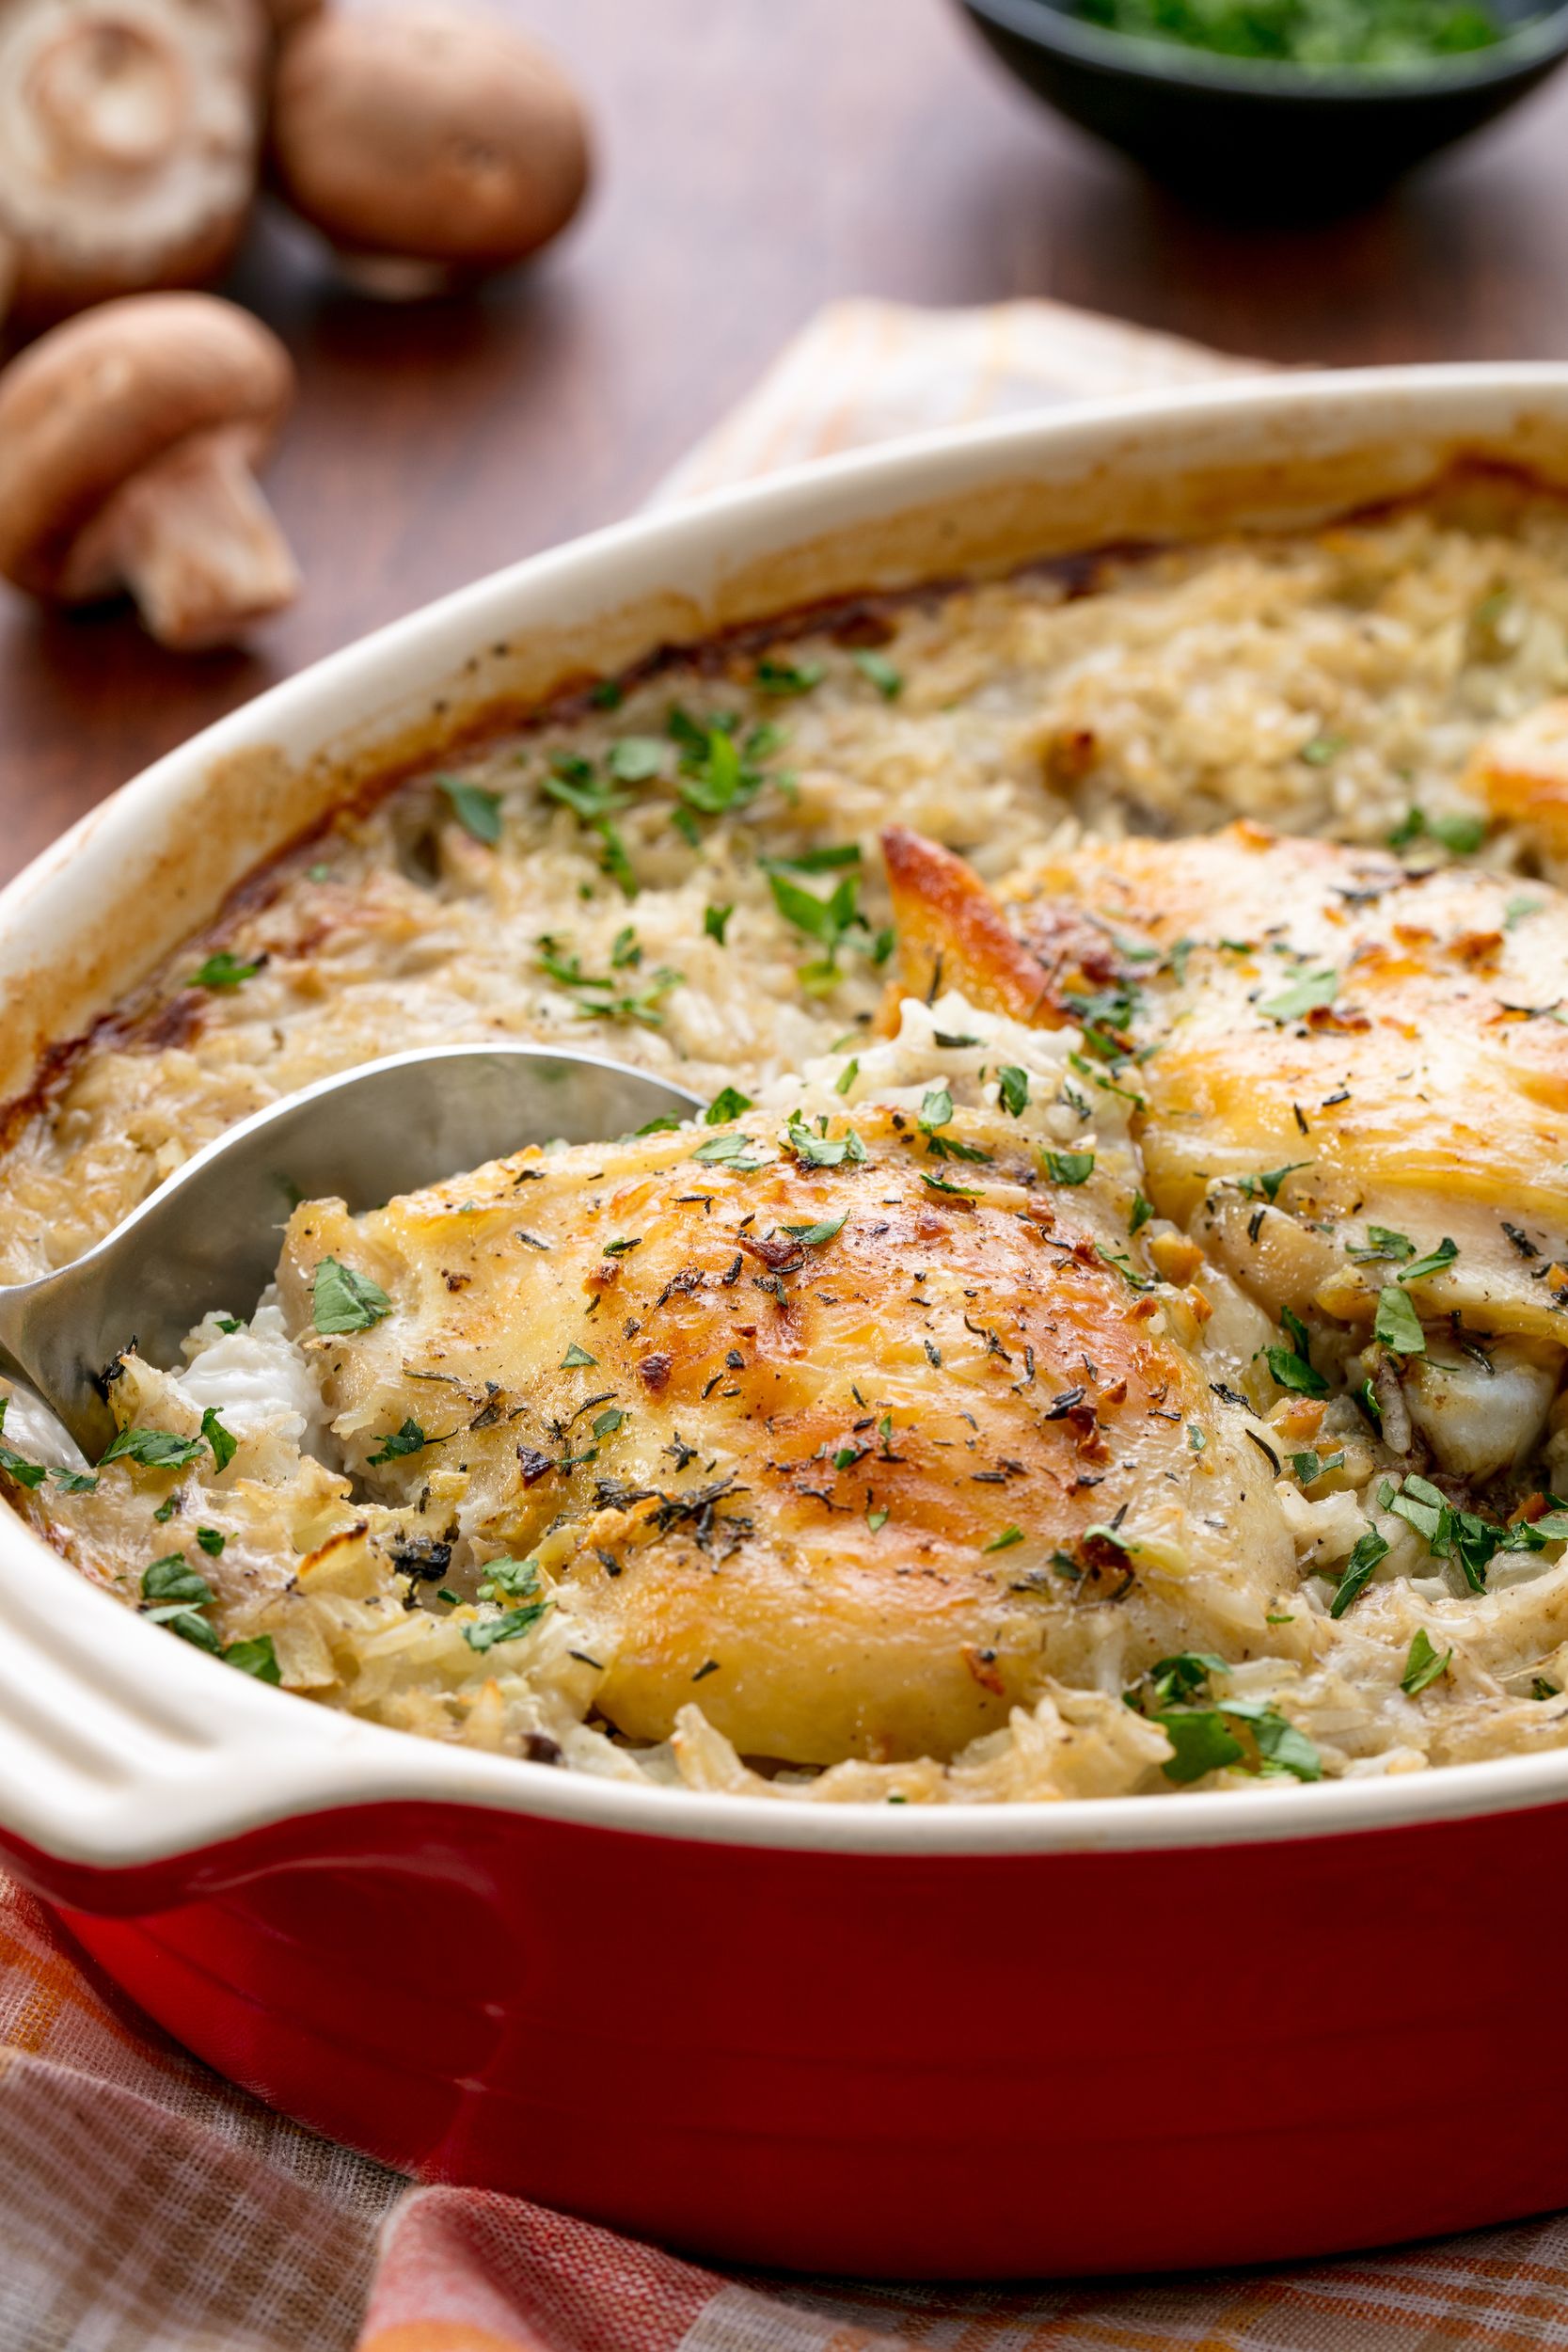 The Best Casserole Dishes